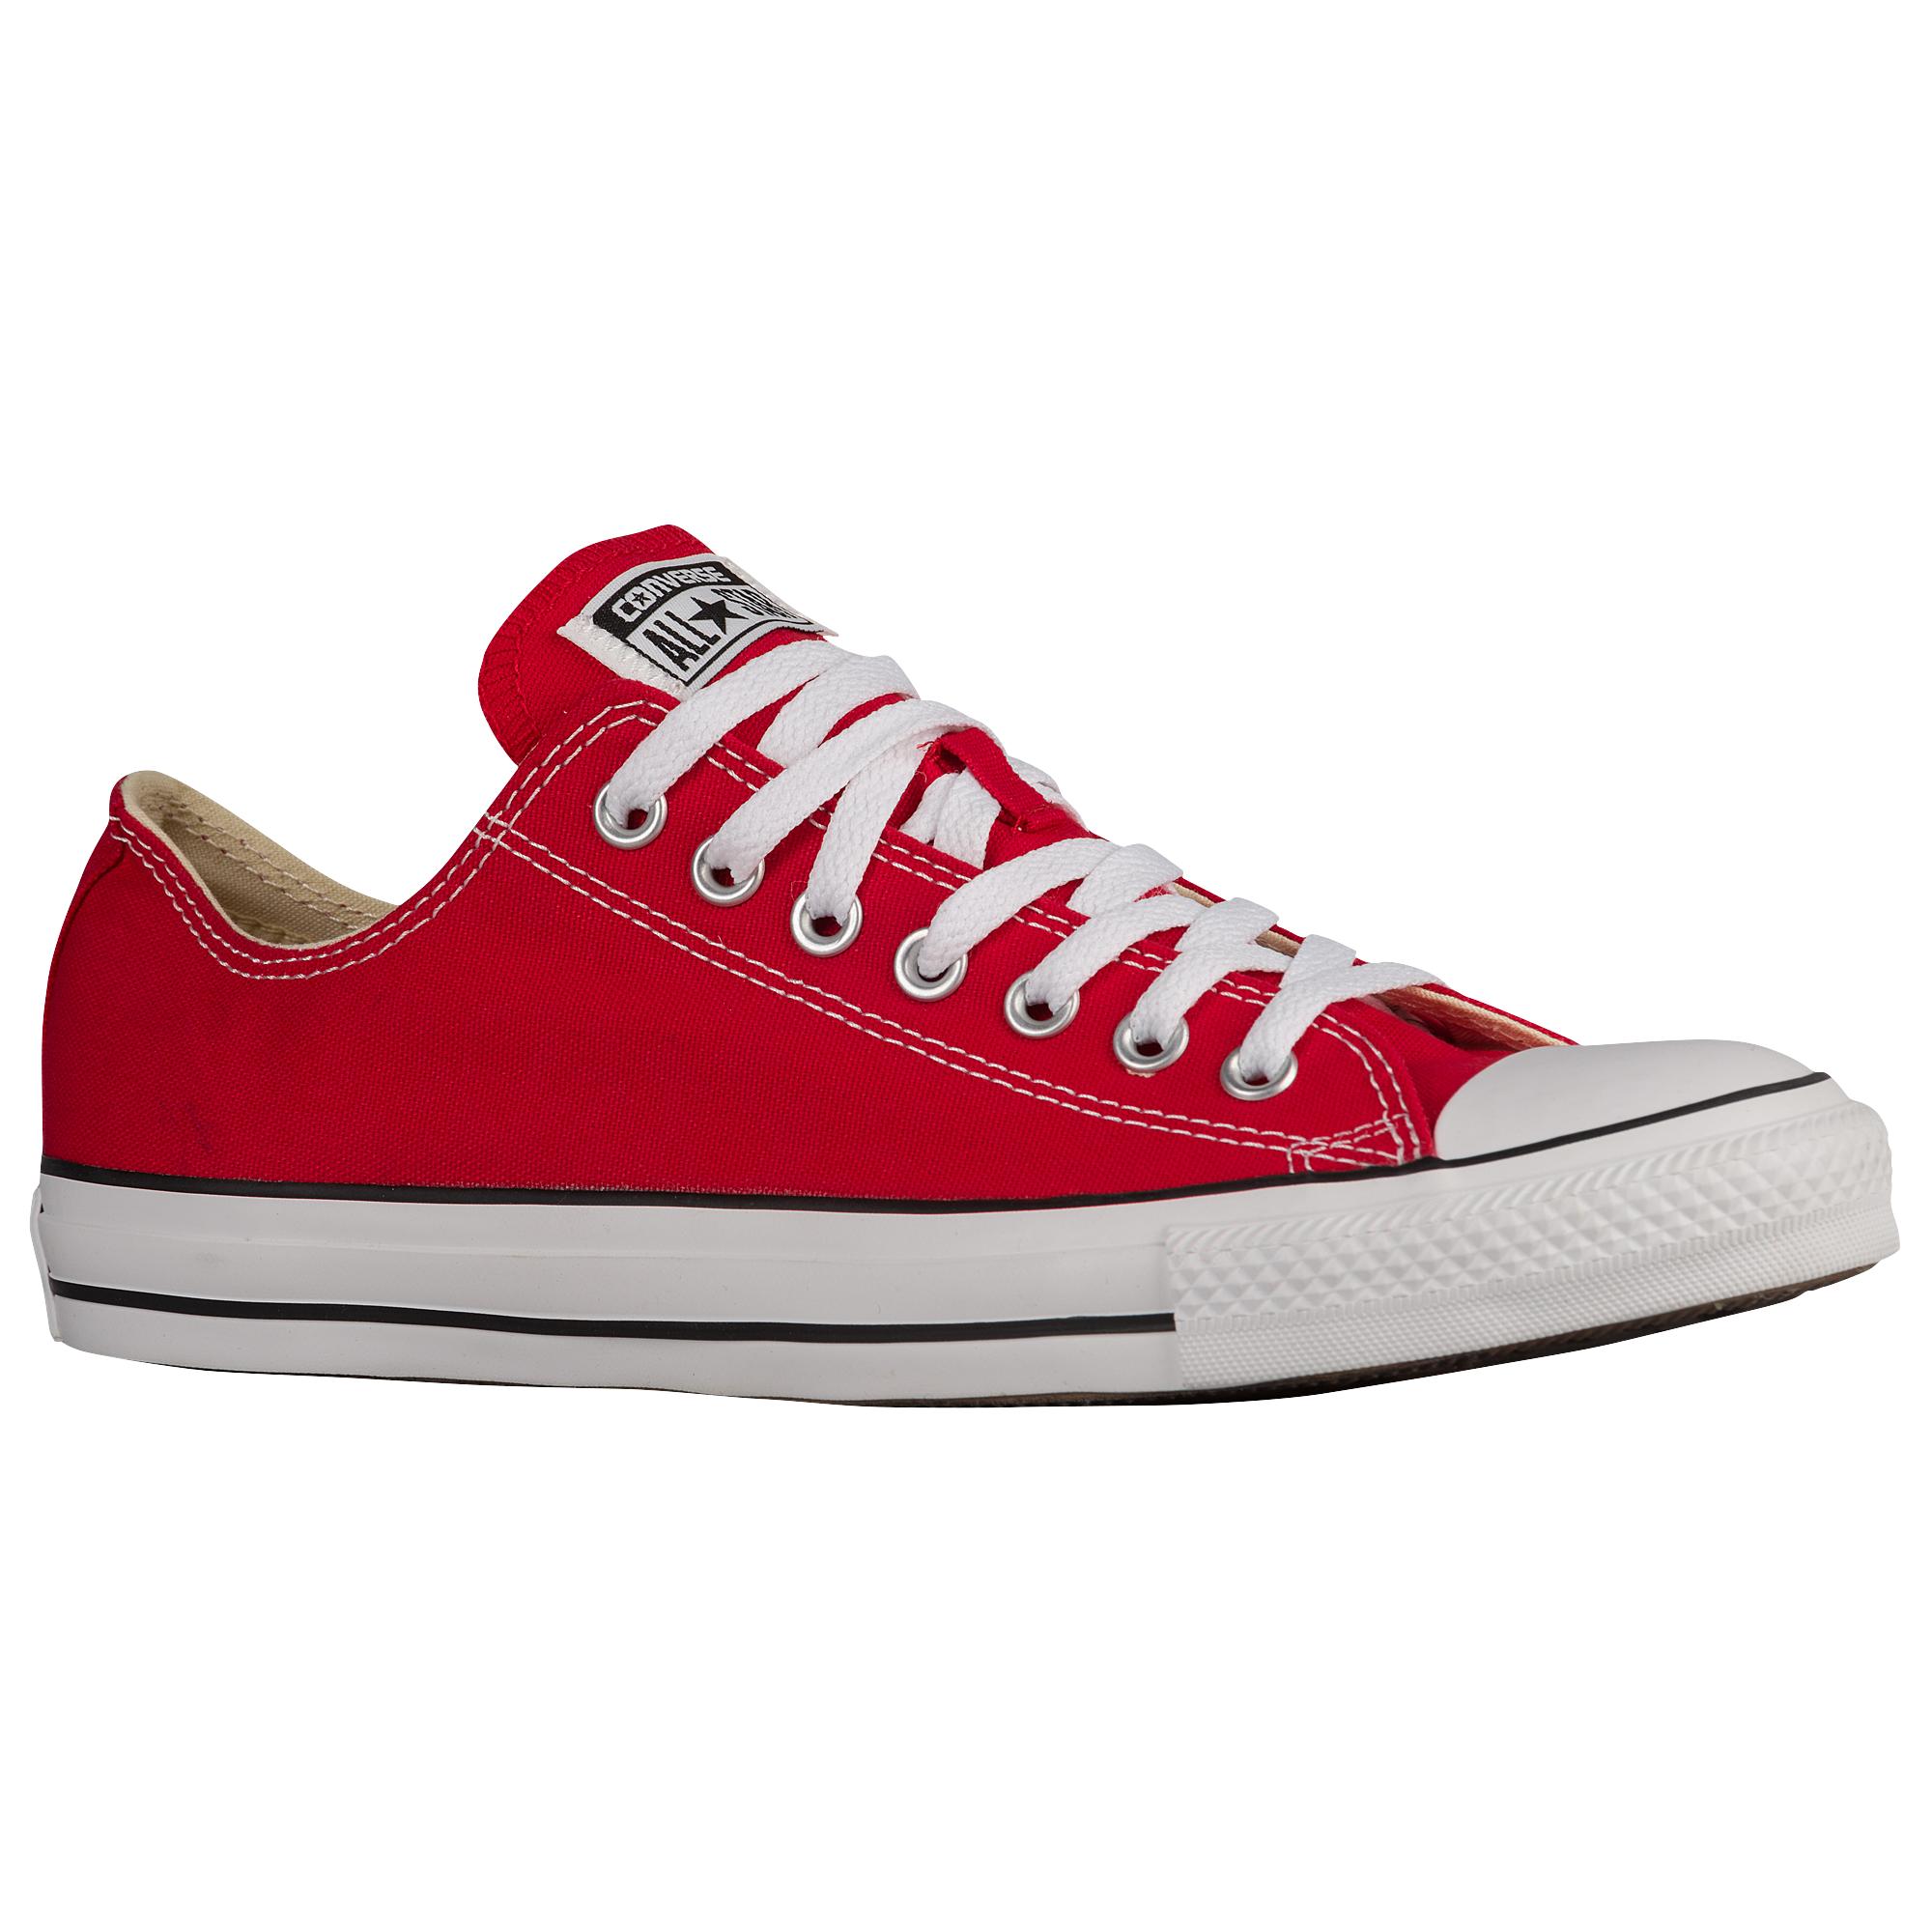 Converse Canvas All Star Ox Basketball Shoes in Bright Red/White (Red ...